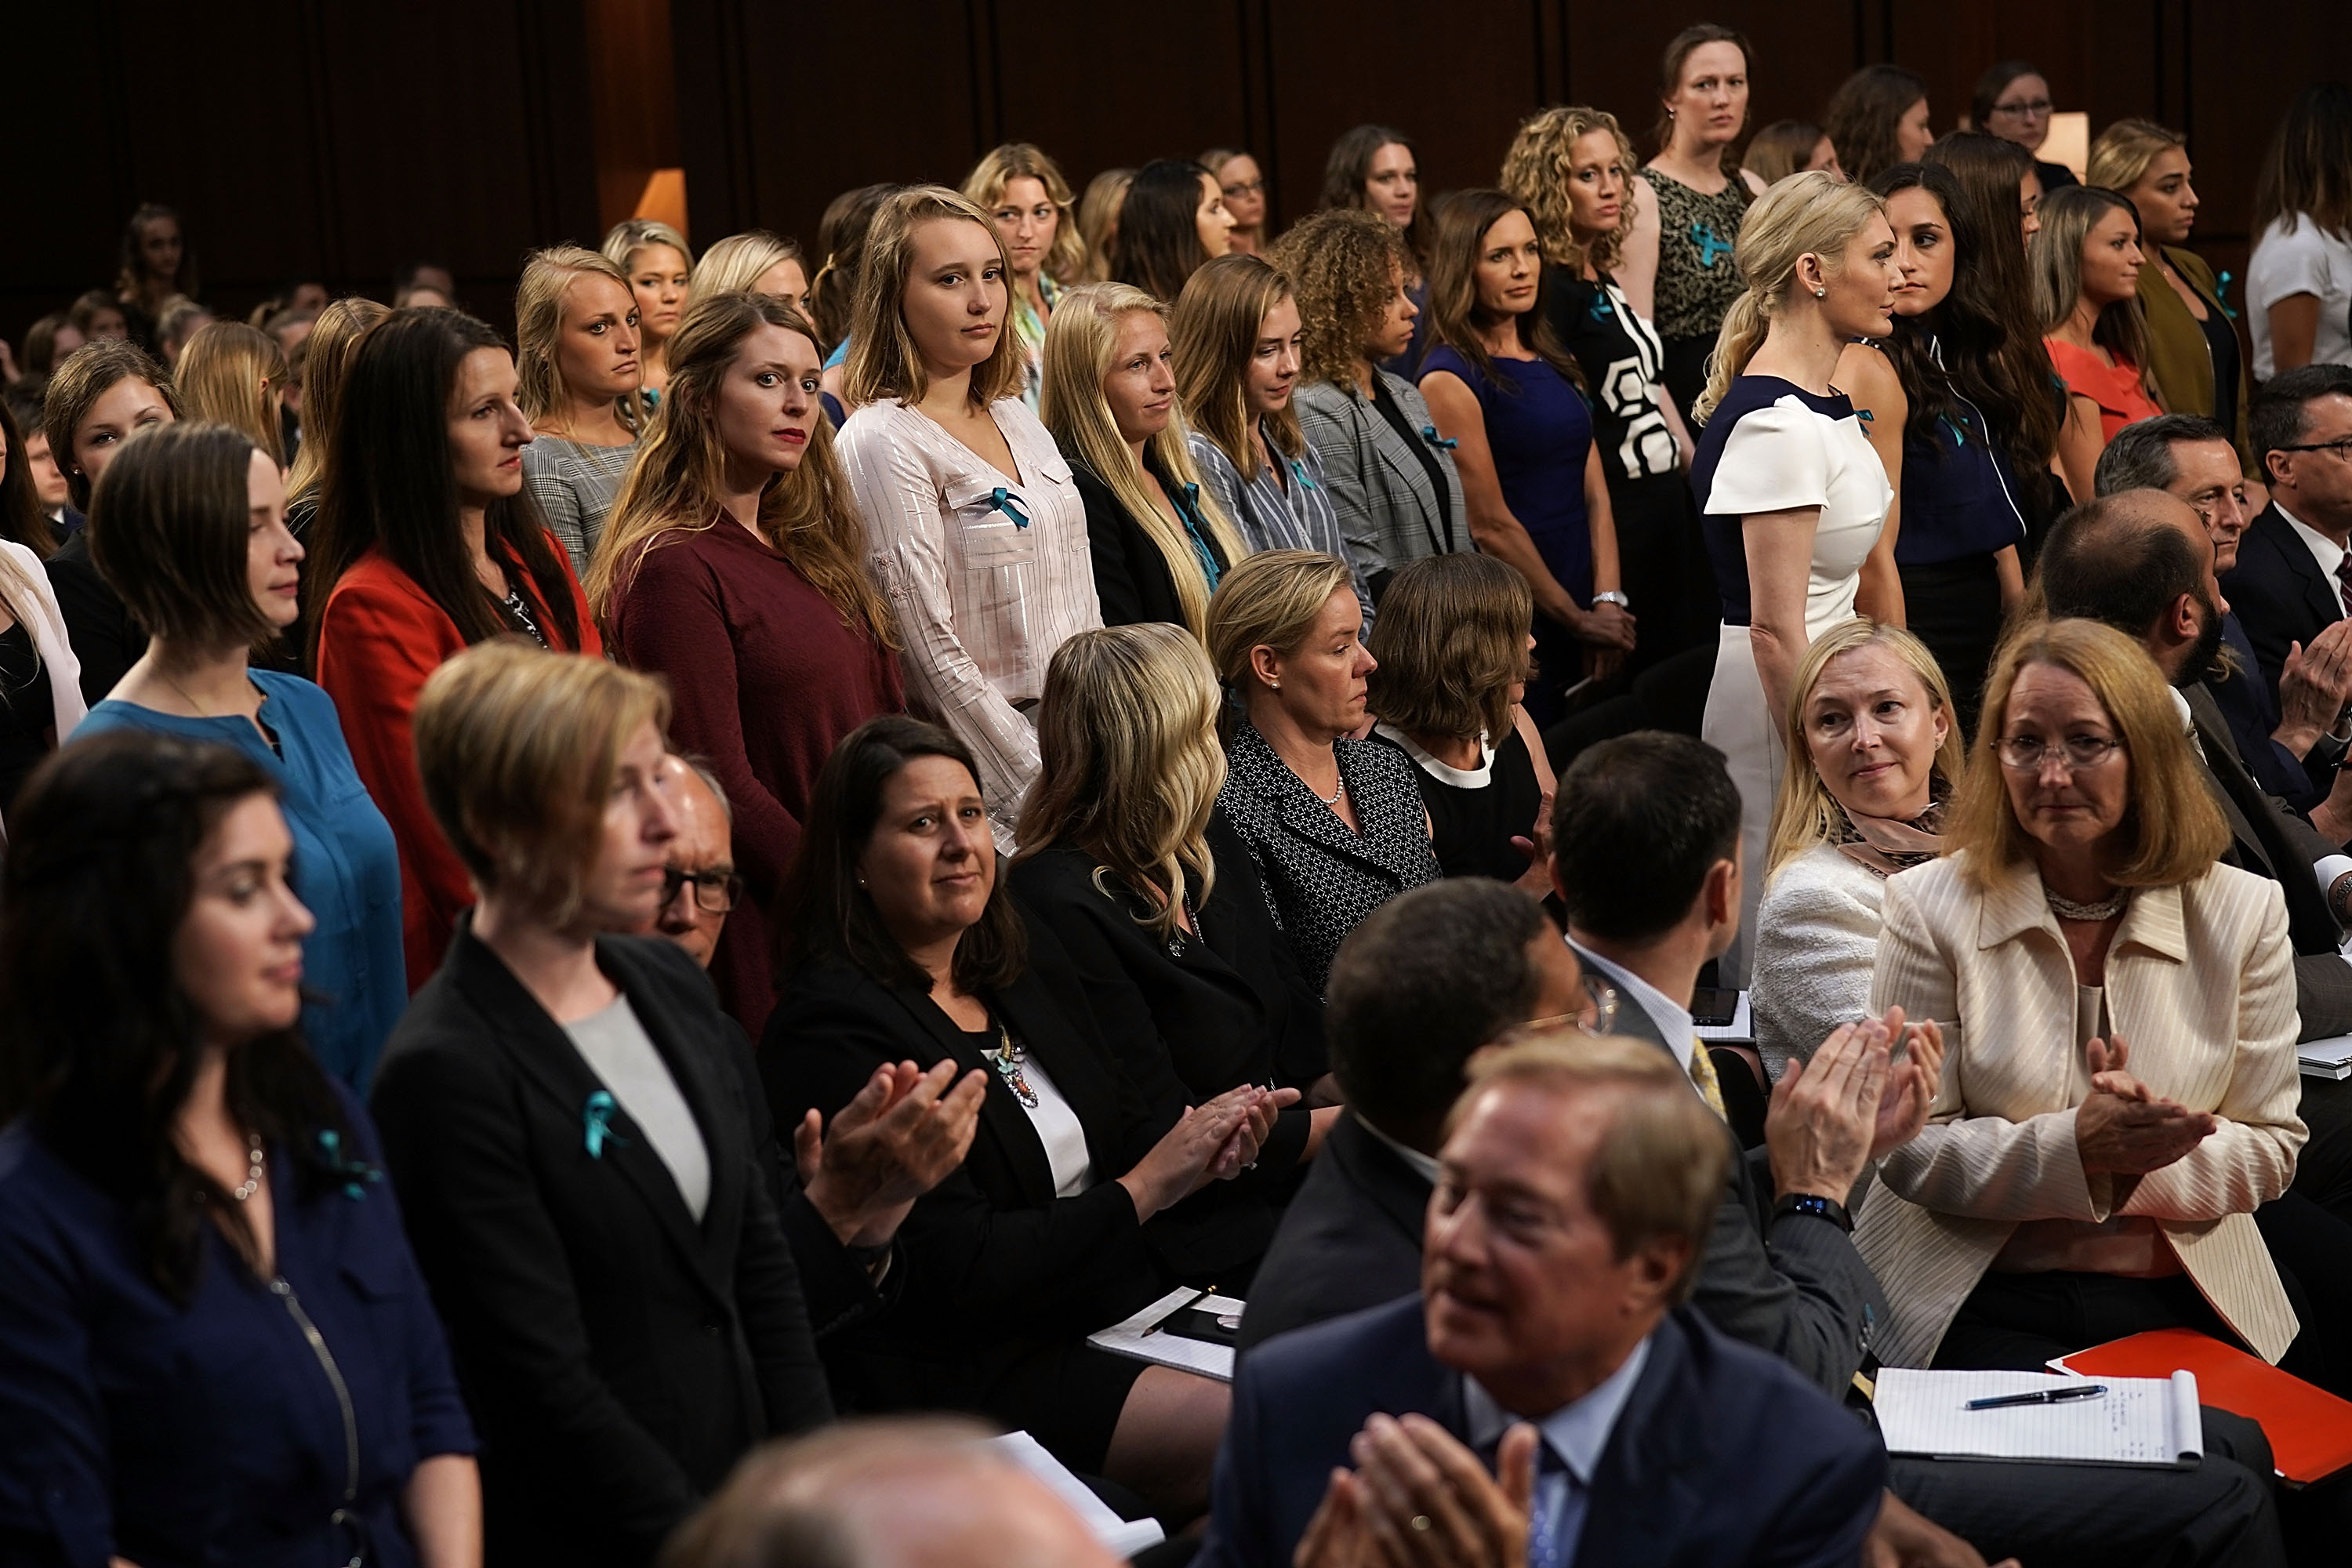 Sexual abuse survivors from the Larry Nassar sexual abuse case stand up as they are acknowledged during a Senate Commerce, Science, and Transportation Committee hearing focusing on changes made by the United States Olympic Committee, USA Gymnastics, and Michigan State University to protect athletes from abuse